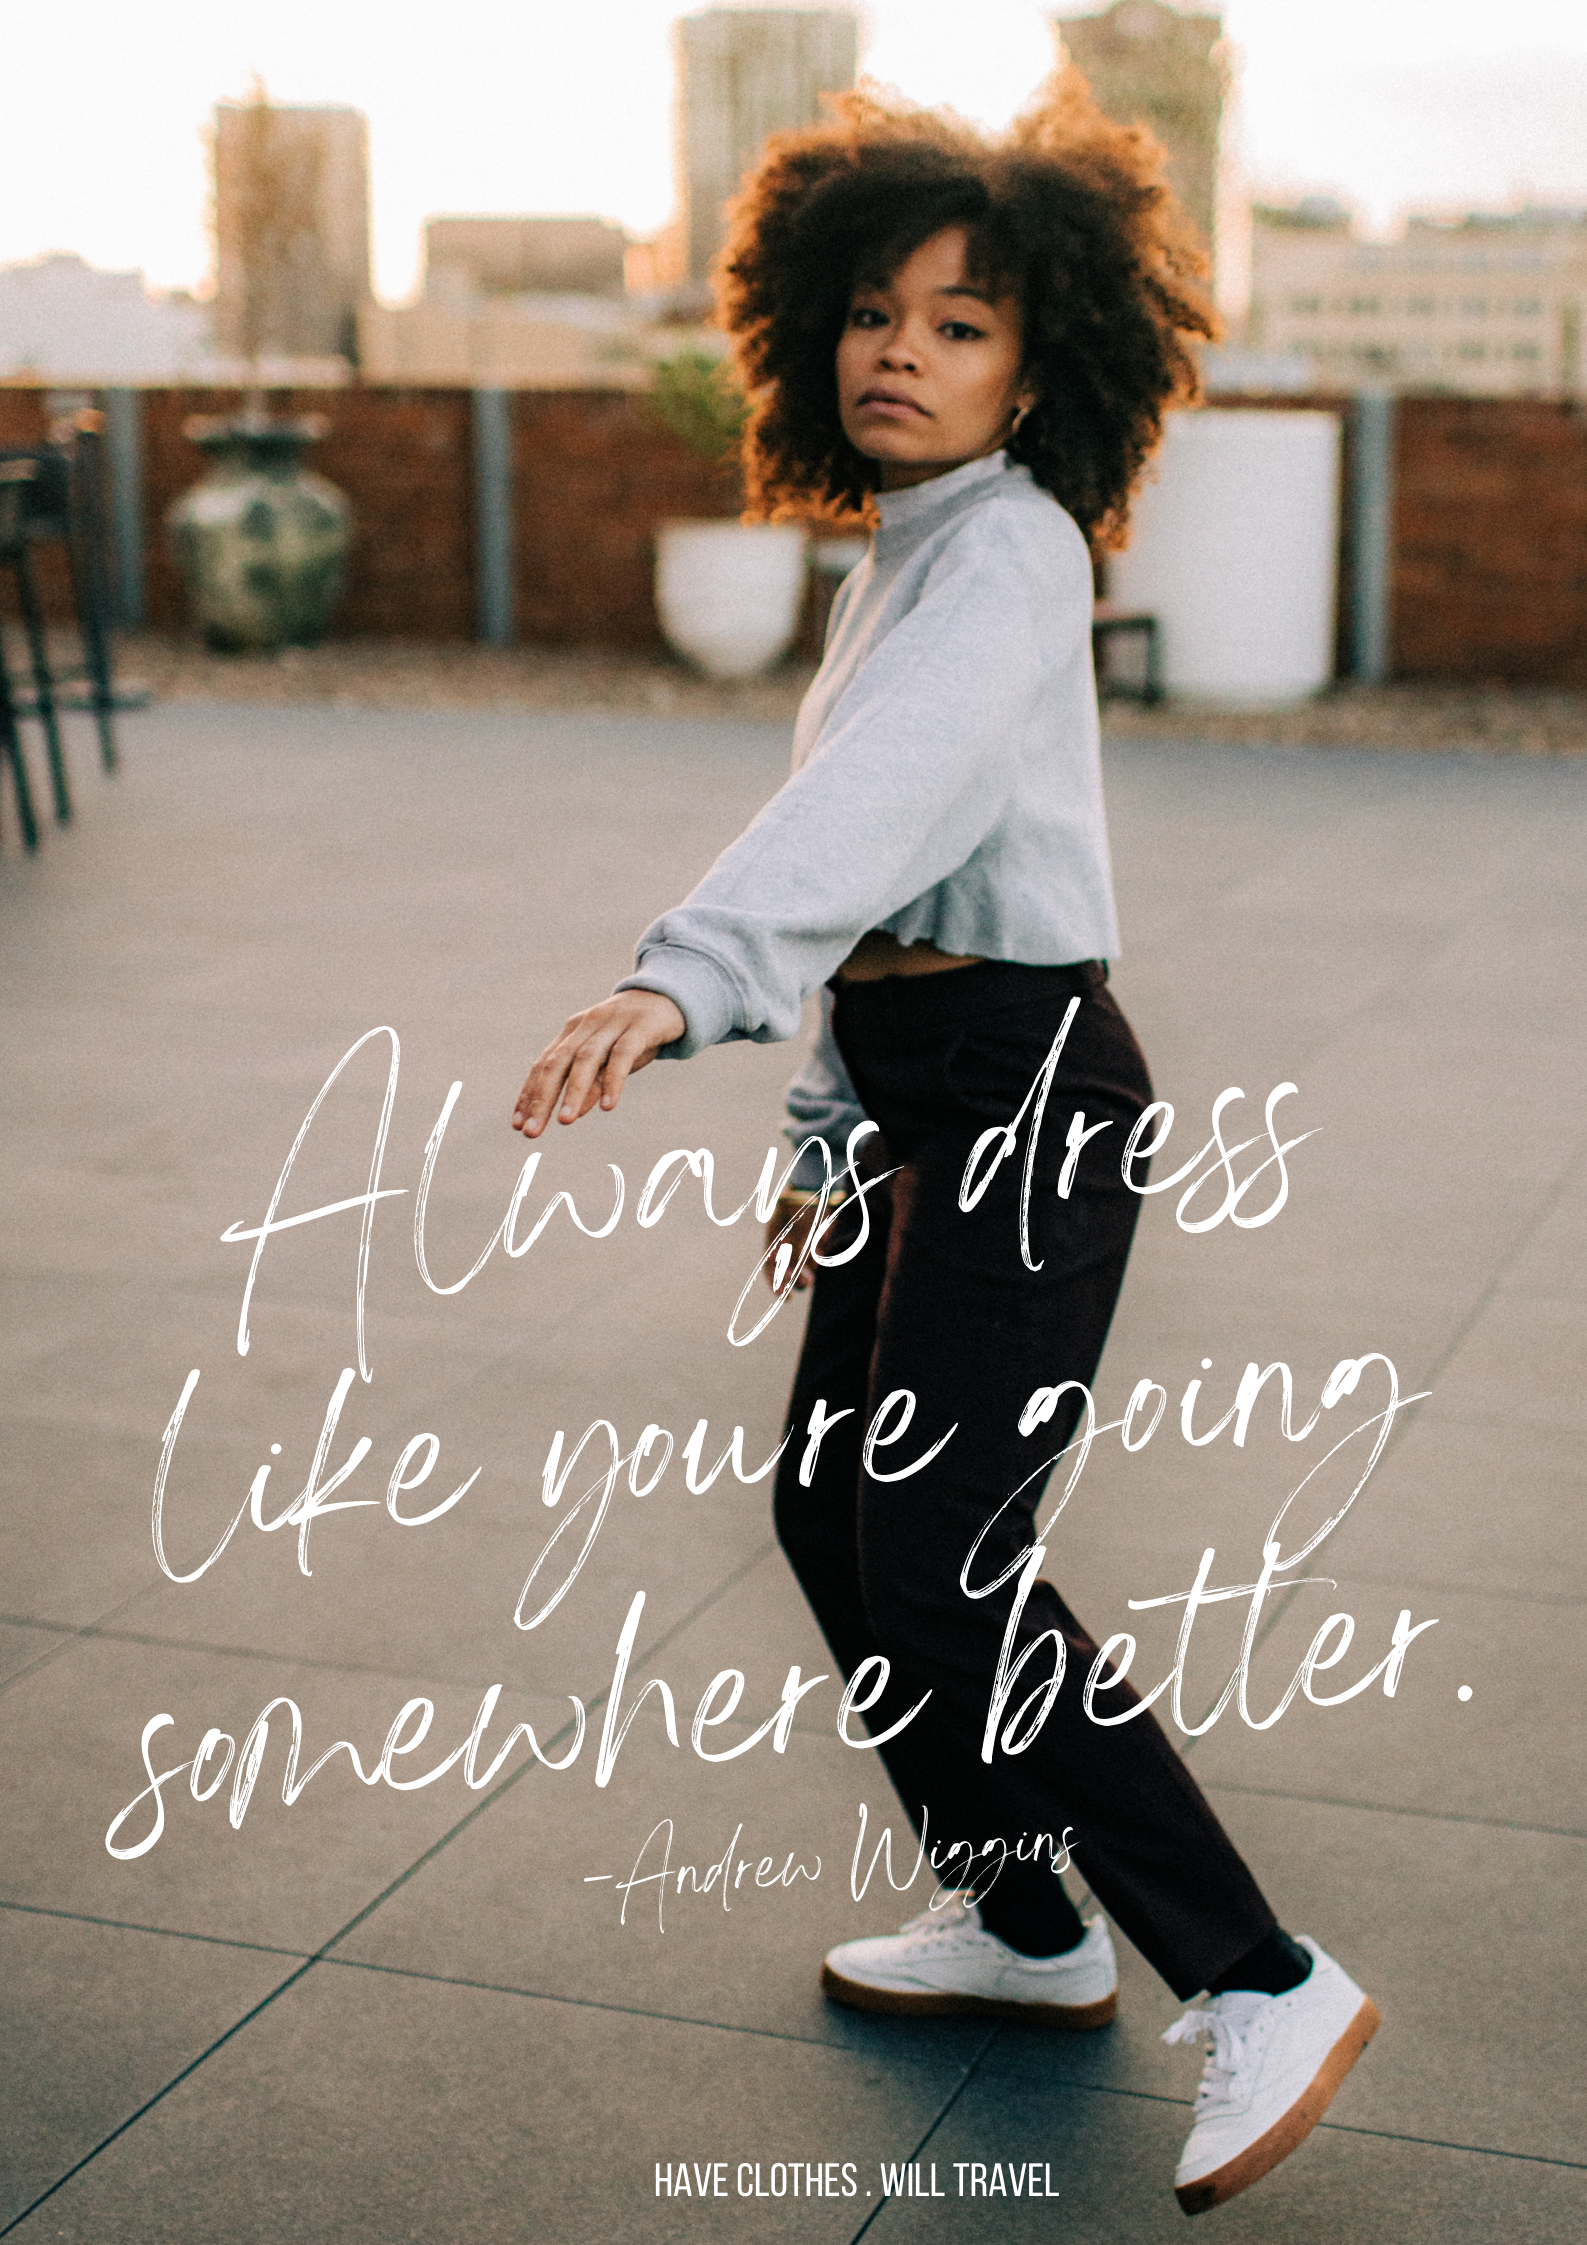 100+ Quotes on Dressing Classy | Have Clothes Will Travel